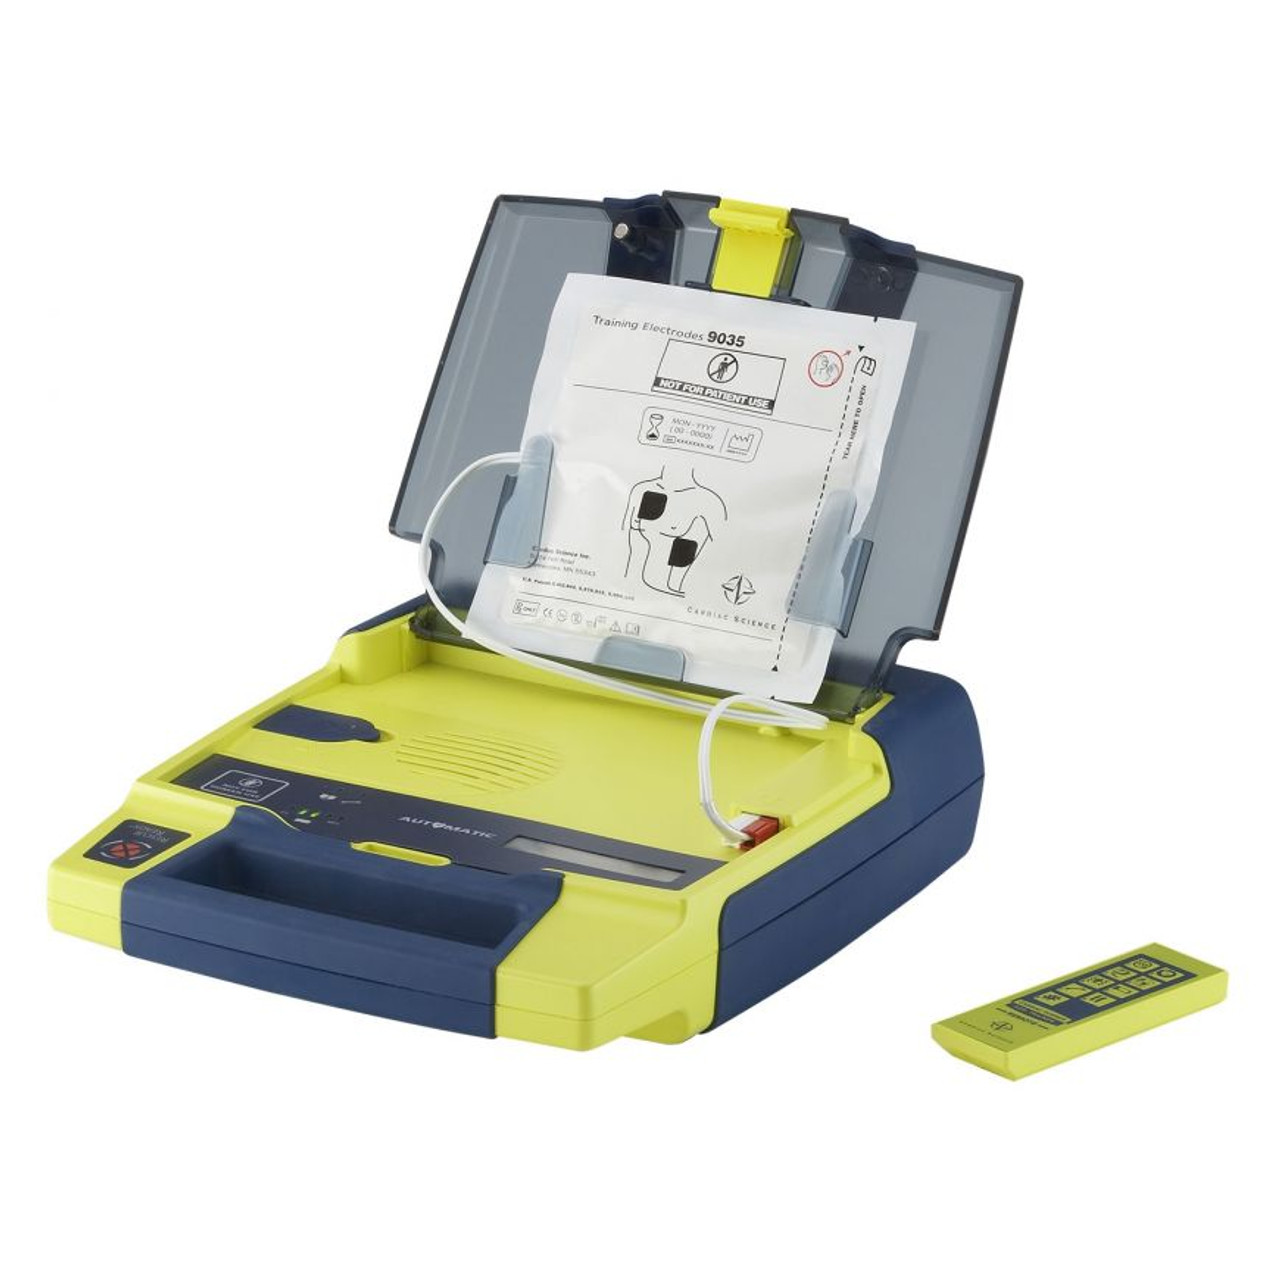 Zoll AED Powerheart G3 Defibrillator & Accessoy, AED Trainer for the G3